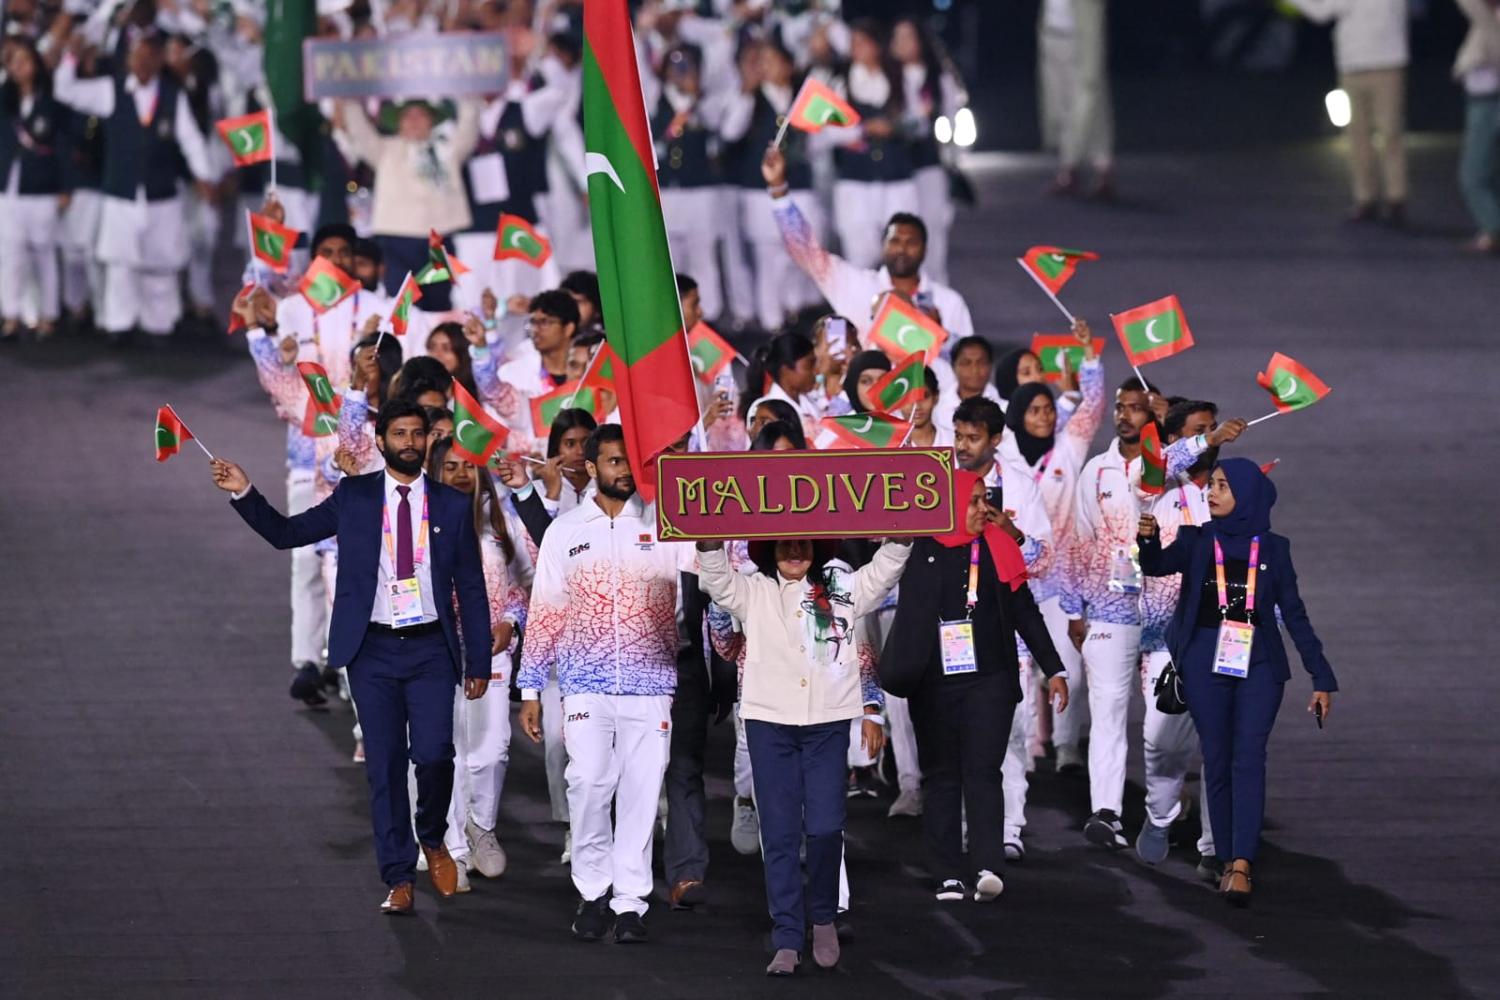 The team from the Maldives - an Indian Ocean archipelago of some 1200 islands and a population of around 500,000 people - at the opening ceremony for the 2022 Commonwealth Games (Glyn Kirk/AFP via Getty Images)